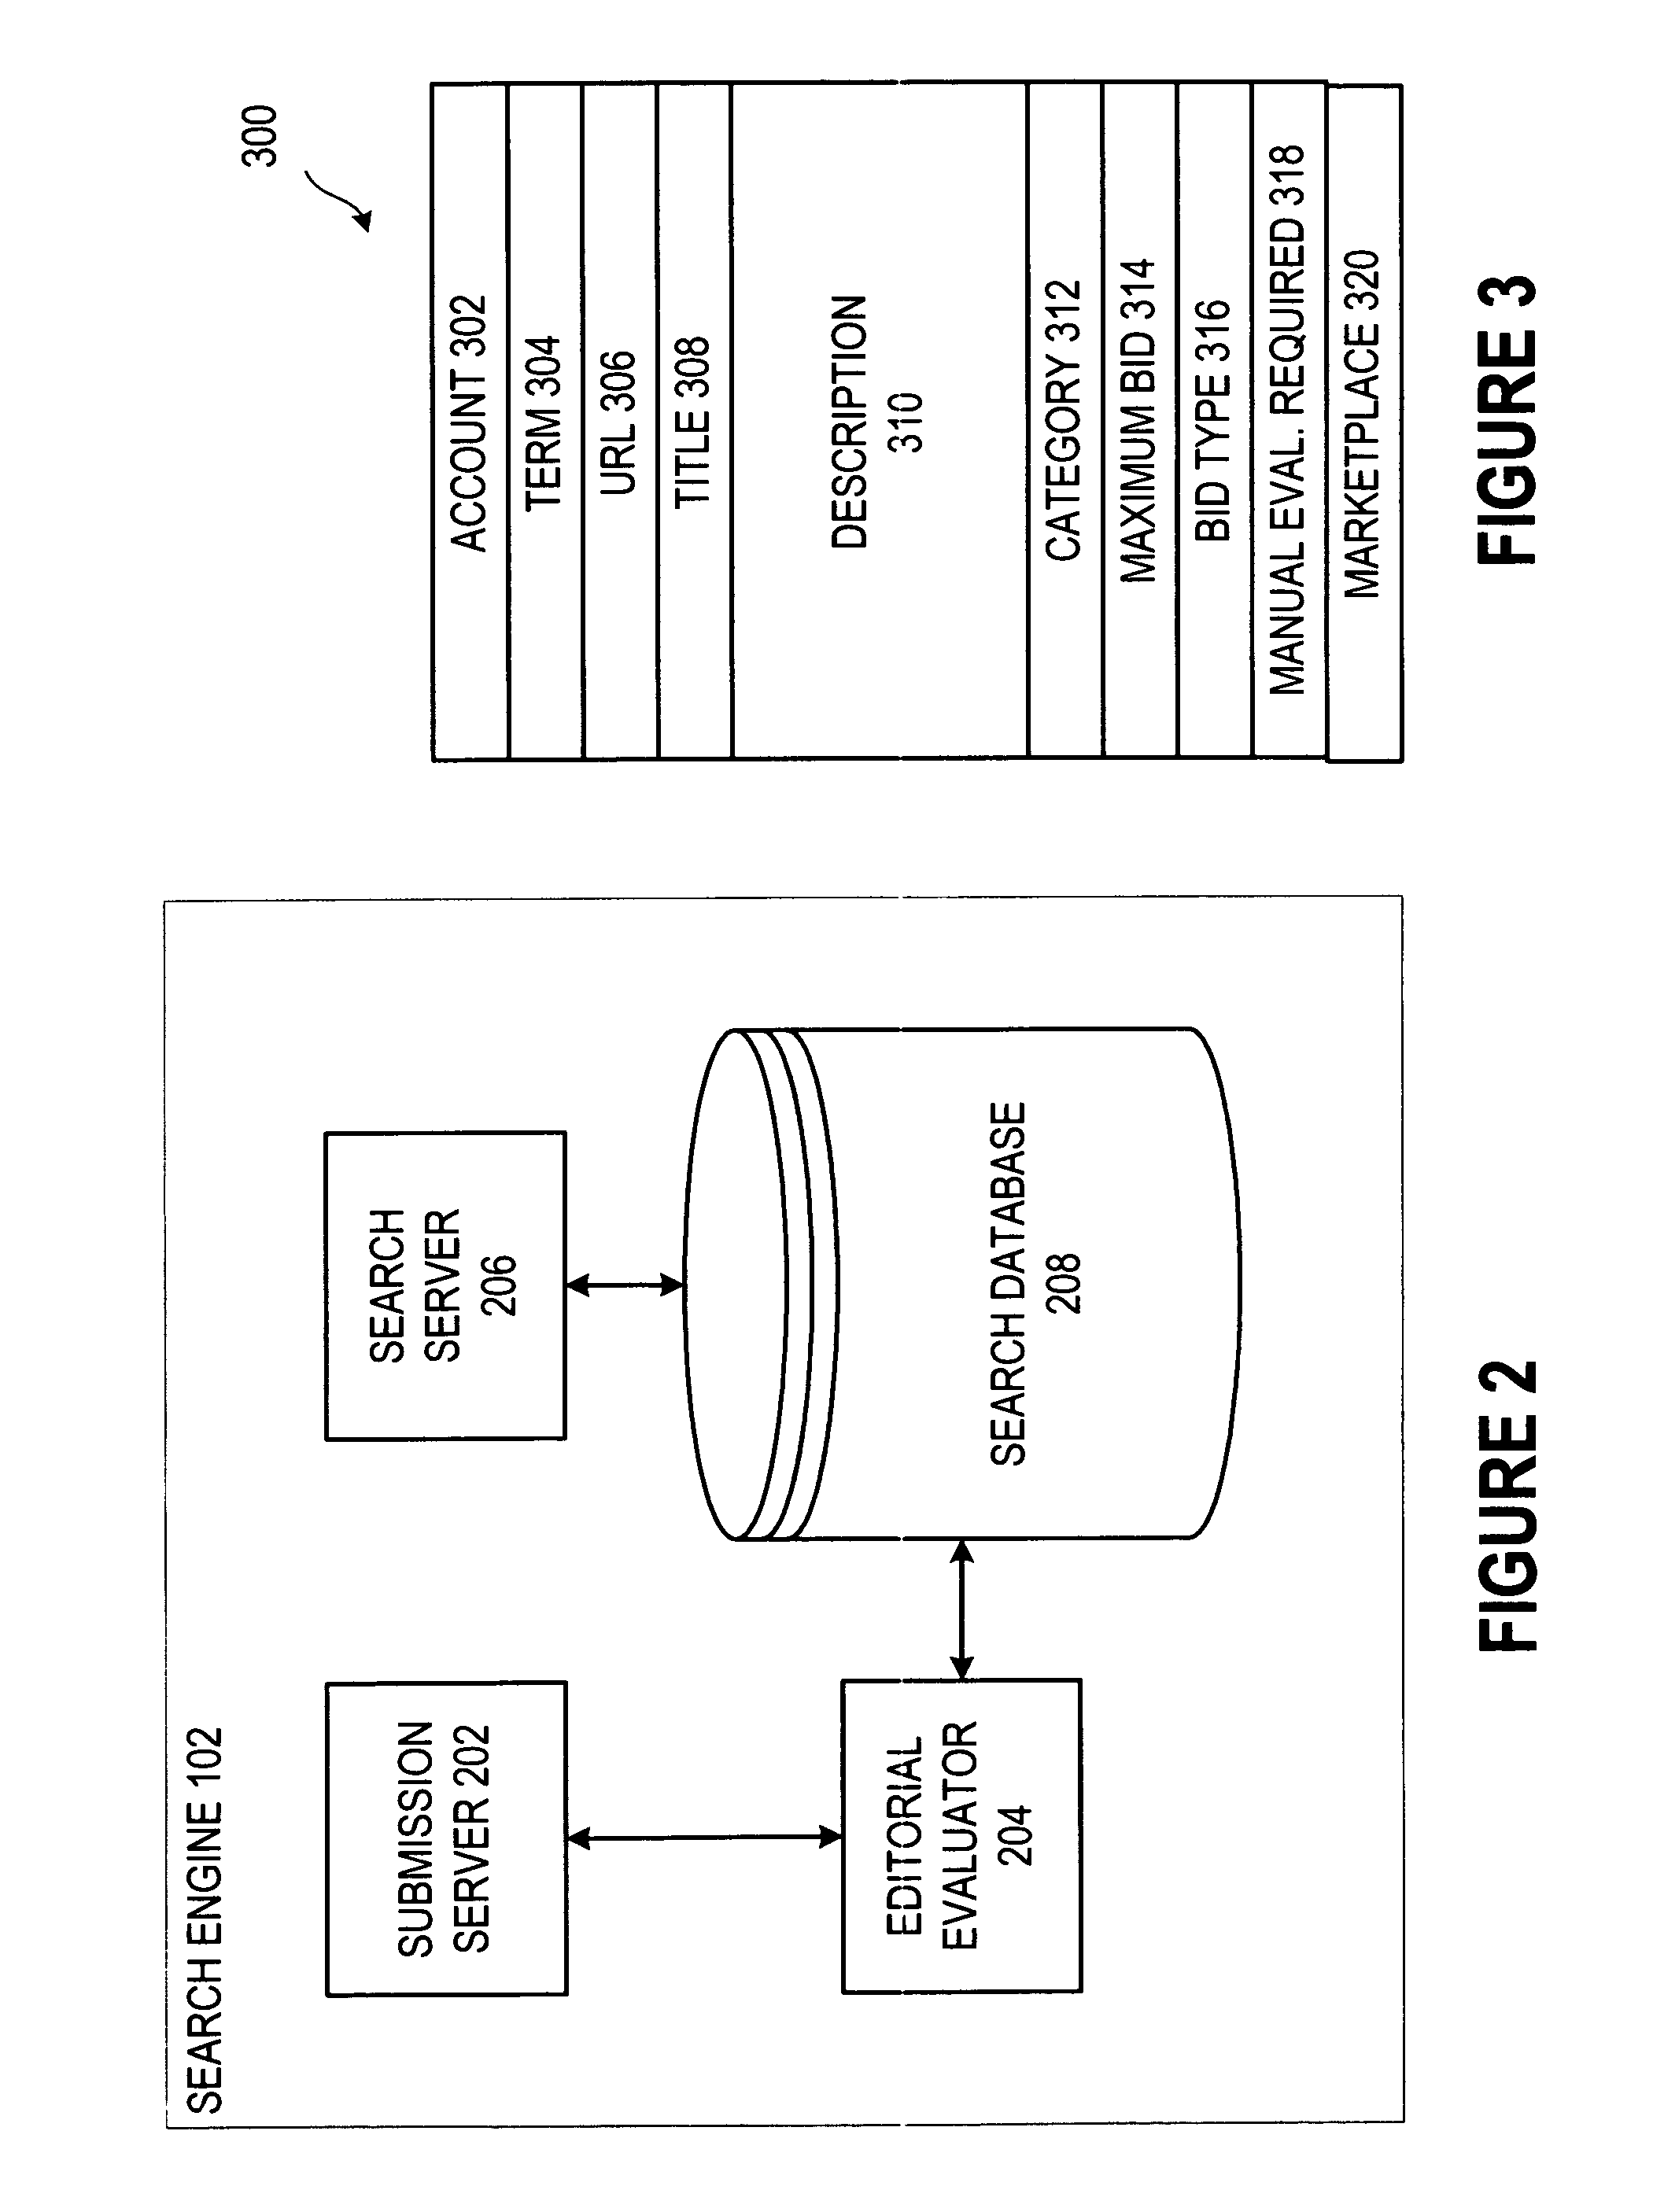 Automated processing of appropriateness determination of content for search listings in wide area network searches